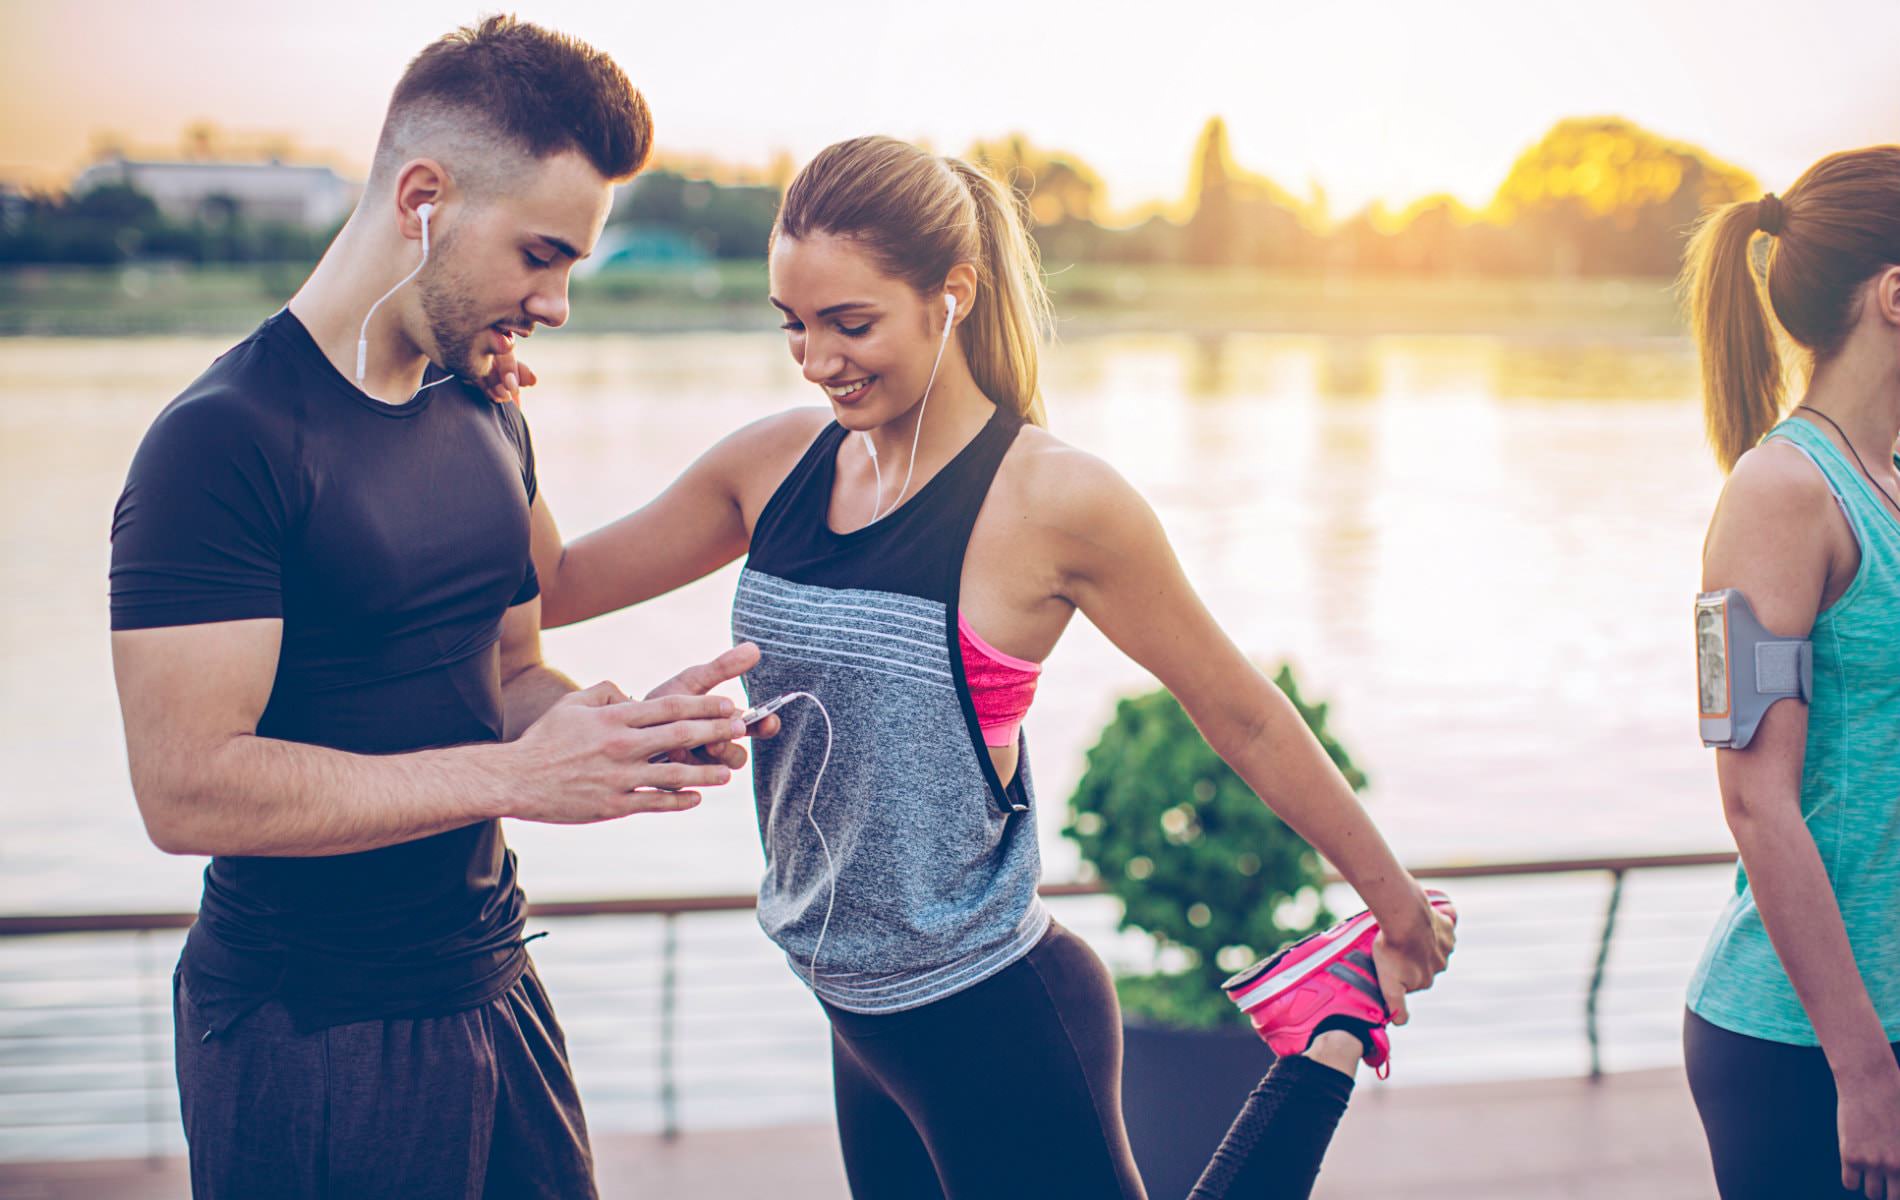 Man and woman in black workout clothes wearing ear buds getting ready to run alongside a body of water